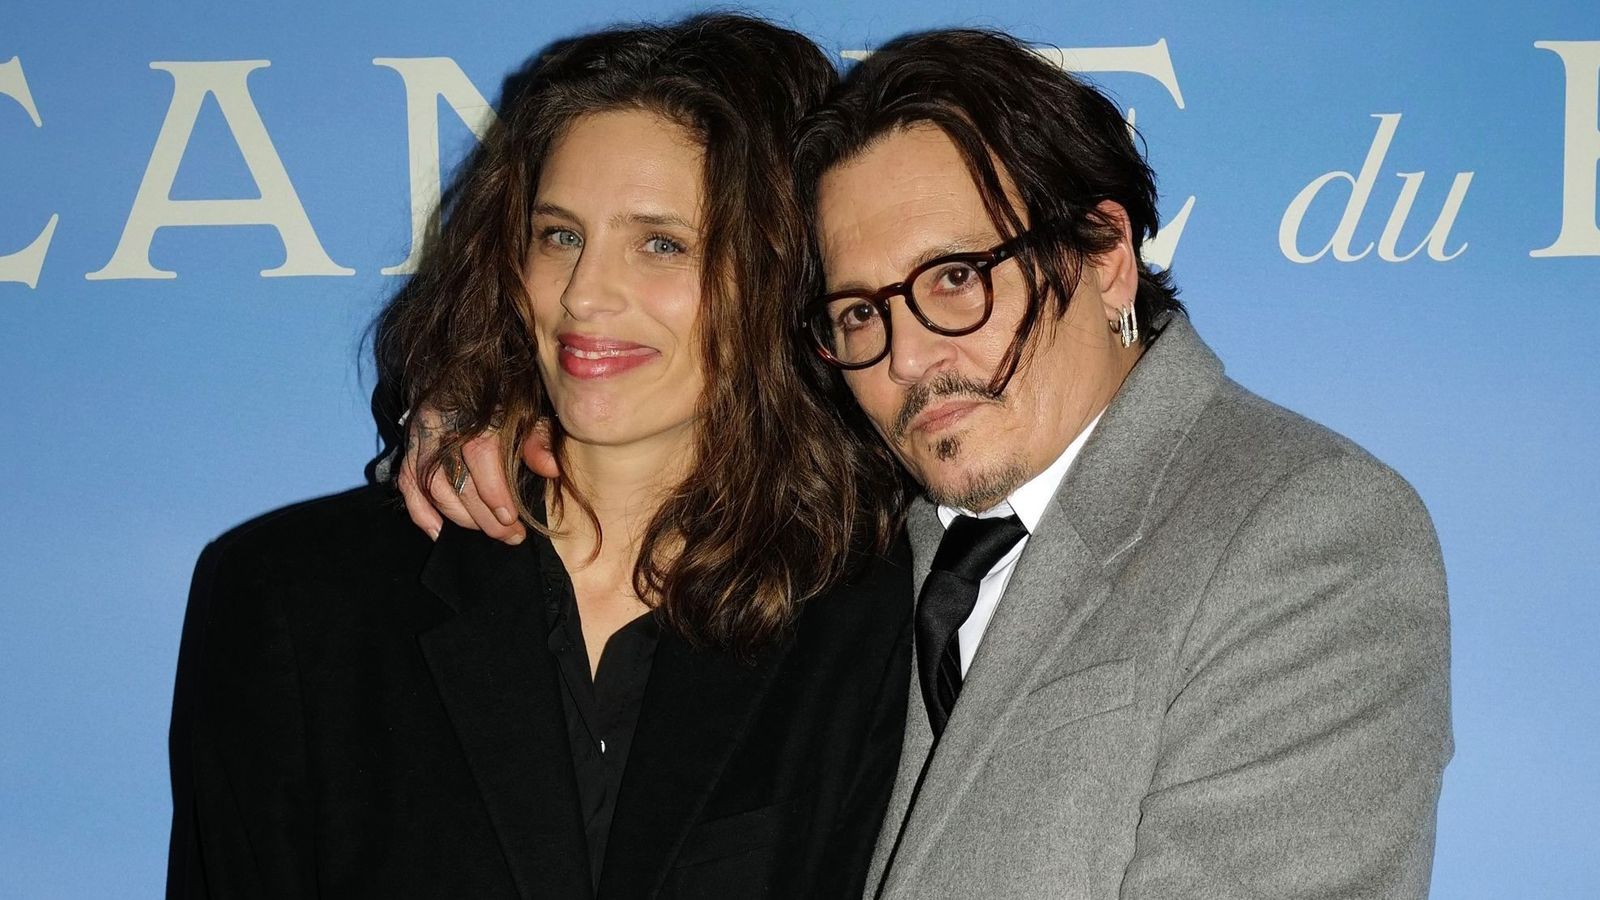 Johnny Depp says he tried to talk Jeanne Du Barry director out of casting him